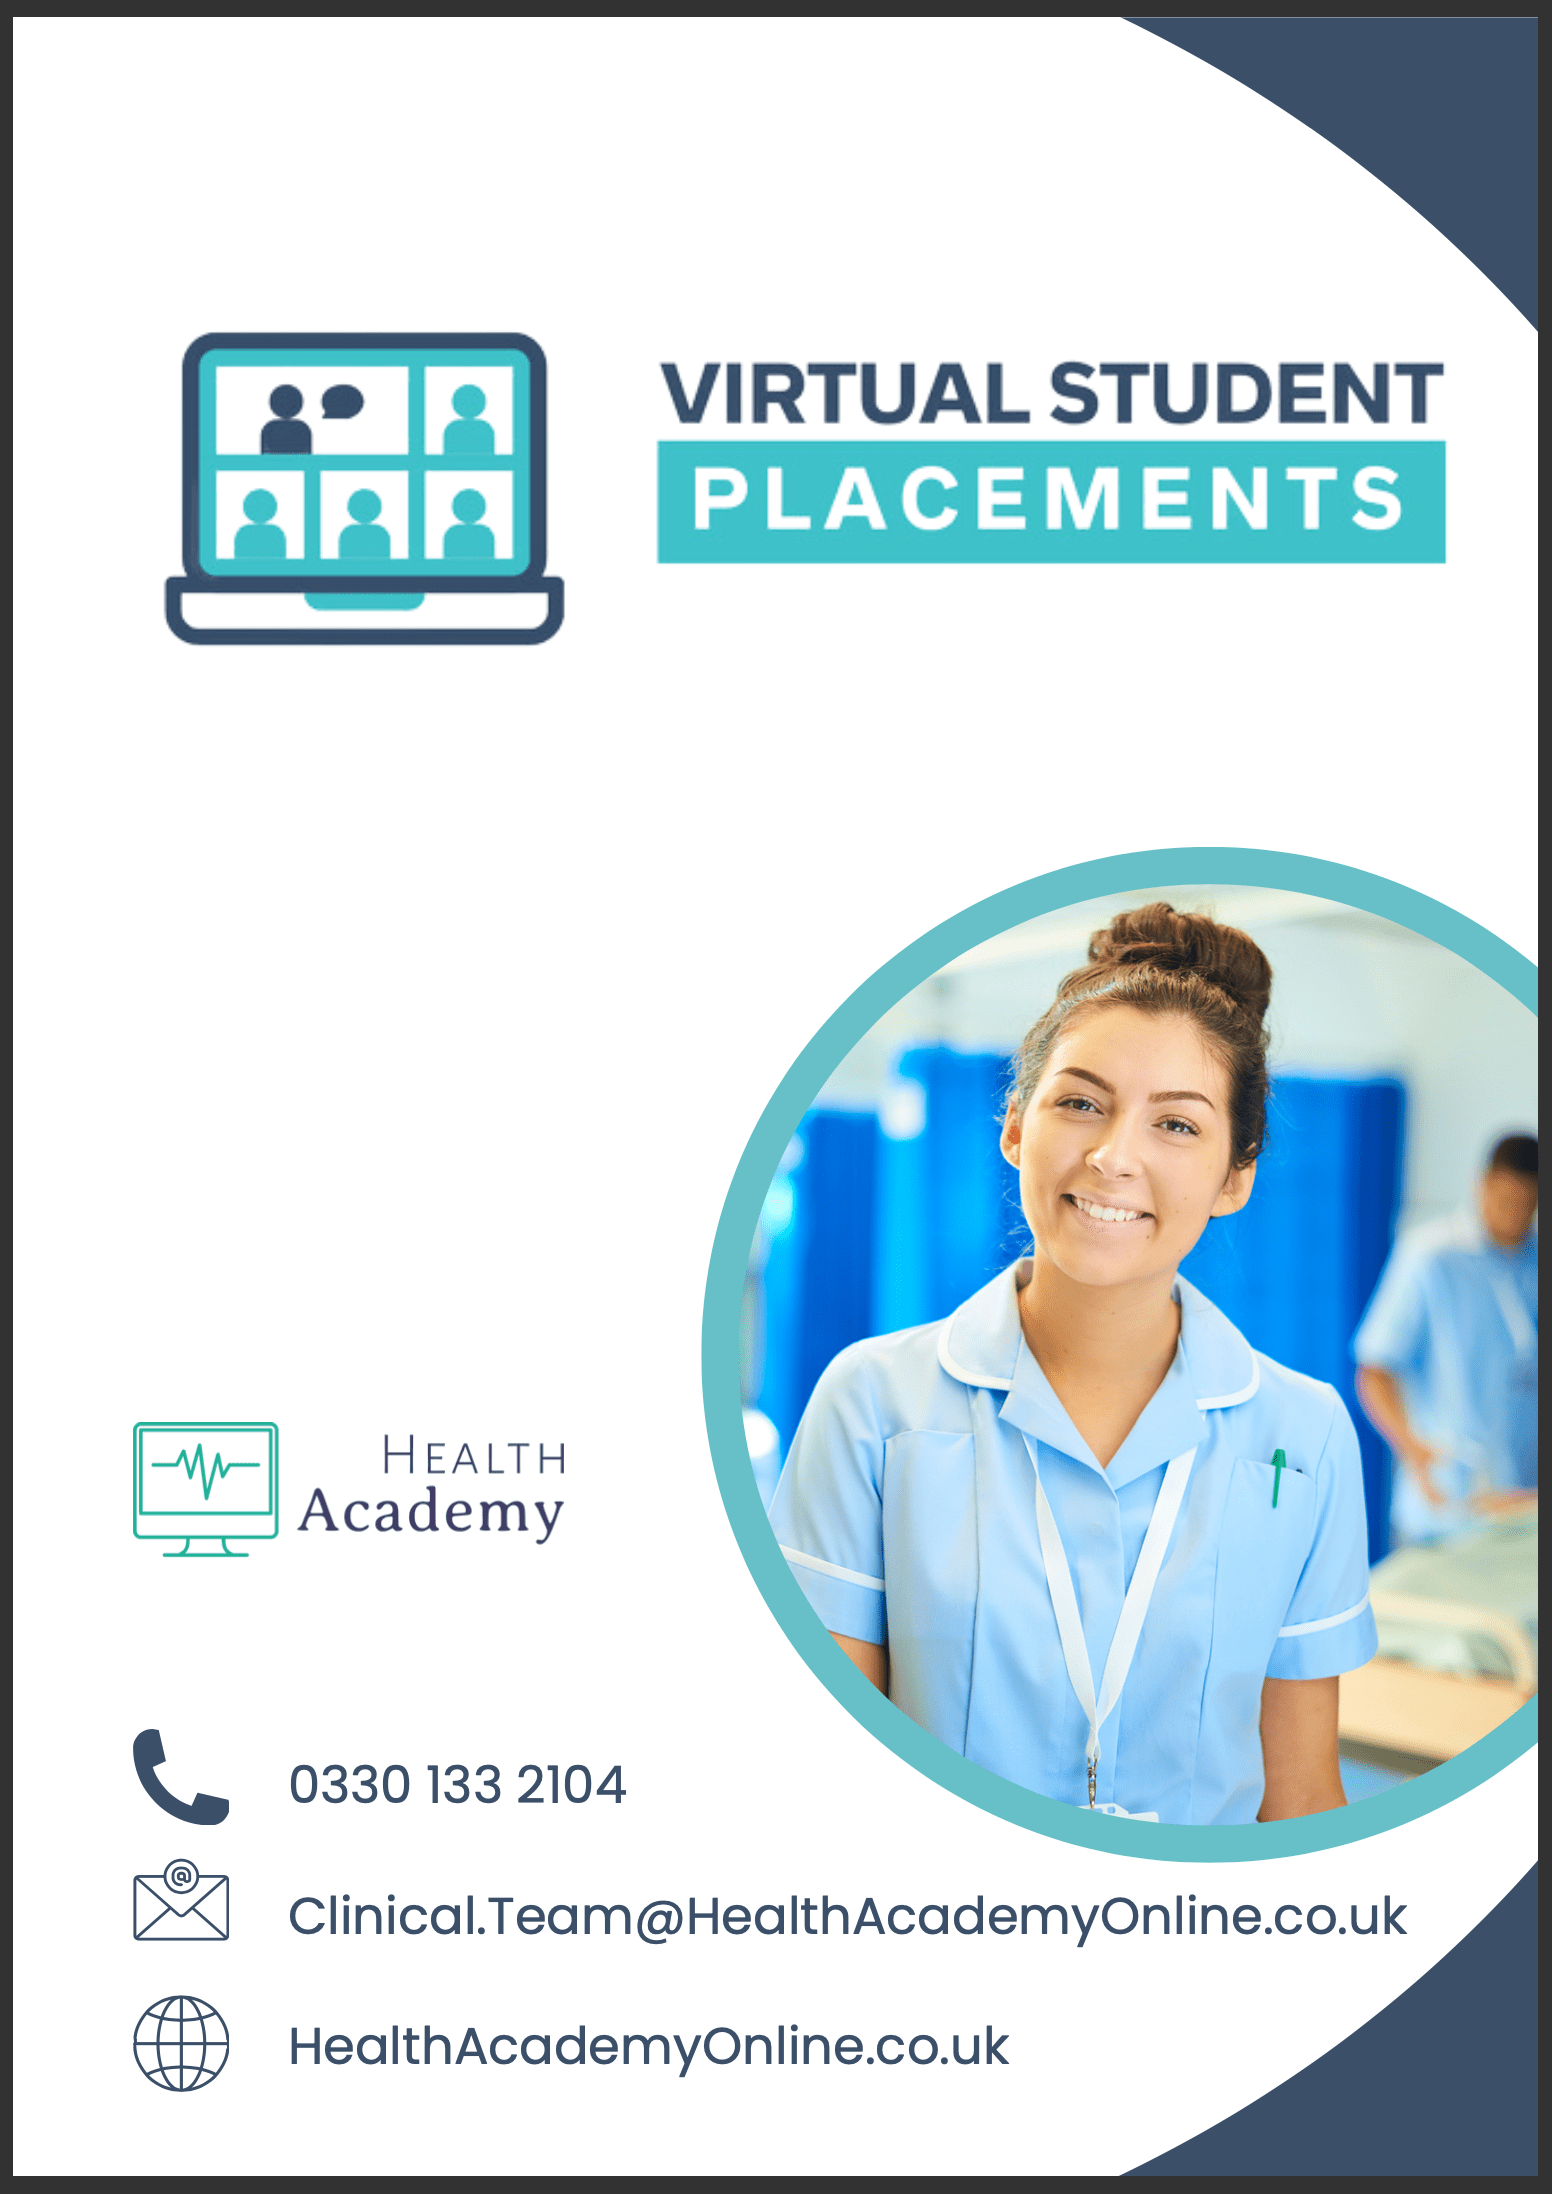 Image showing health academy virtual student placements brochure